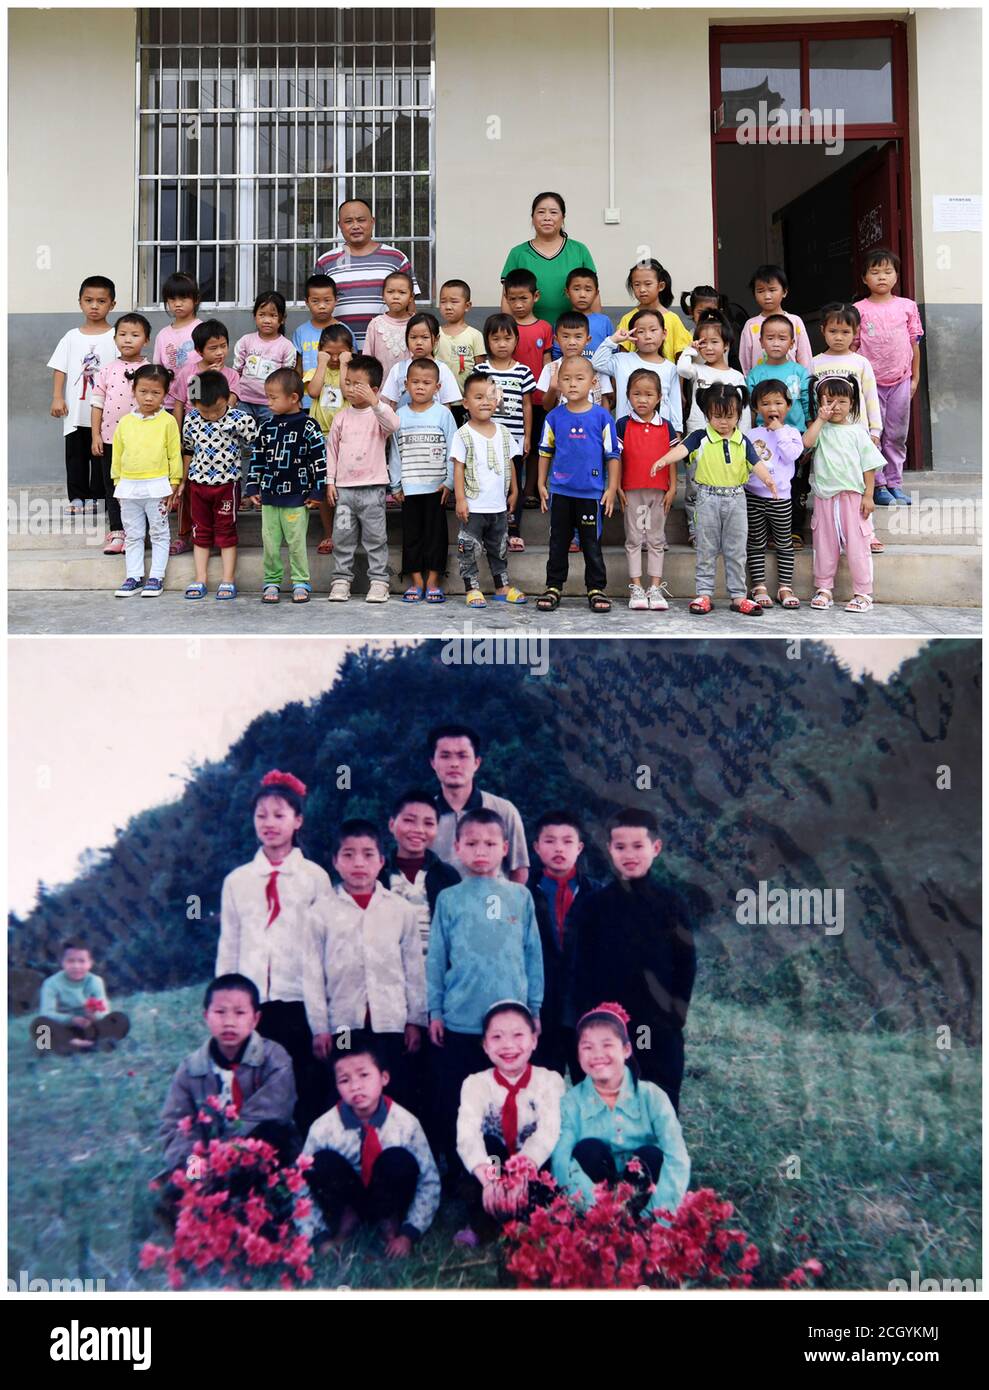 (200913) -- RONGJIANG, Sept. 13, 2020 (Xinhua) -- This combo photo shows Gun Luquan and Pan Mingzhen posing with students at Miaoben Primary School in Rongjiang County, southwest China's Guizhou Province (top, photo taken on Sept. 9, 2020); and an undated file photo of Gun posing with students during a school trip years ago (bottom).  Gun Luquan and his wife Pan Mingzhen are a teacher couple who dedicated themselves to rural students at Miaoben Primary School for more than 20 years in mountainous Rongjiang County. As the school's only two remaining teaching staff members, Gun and Pan have neve Stock Photo